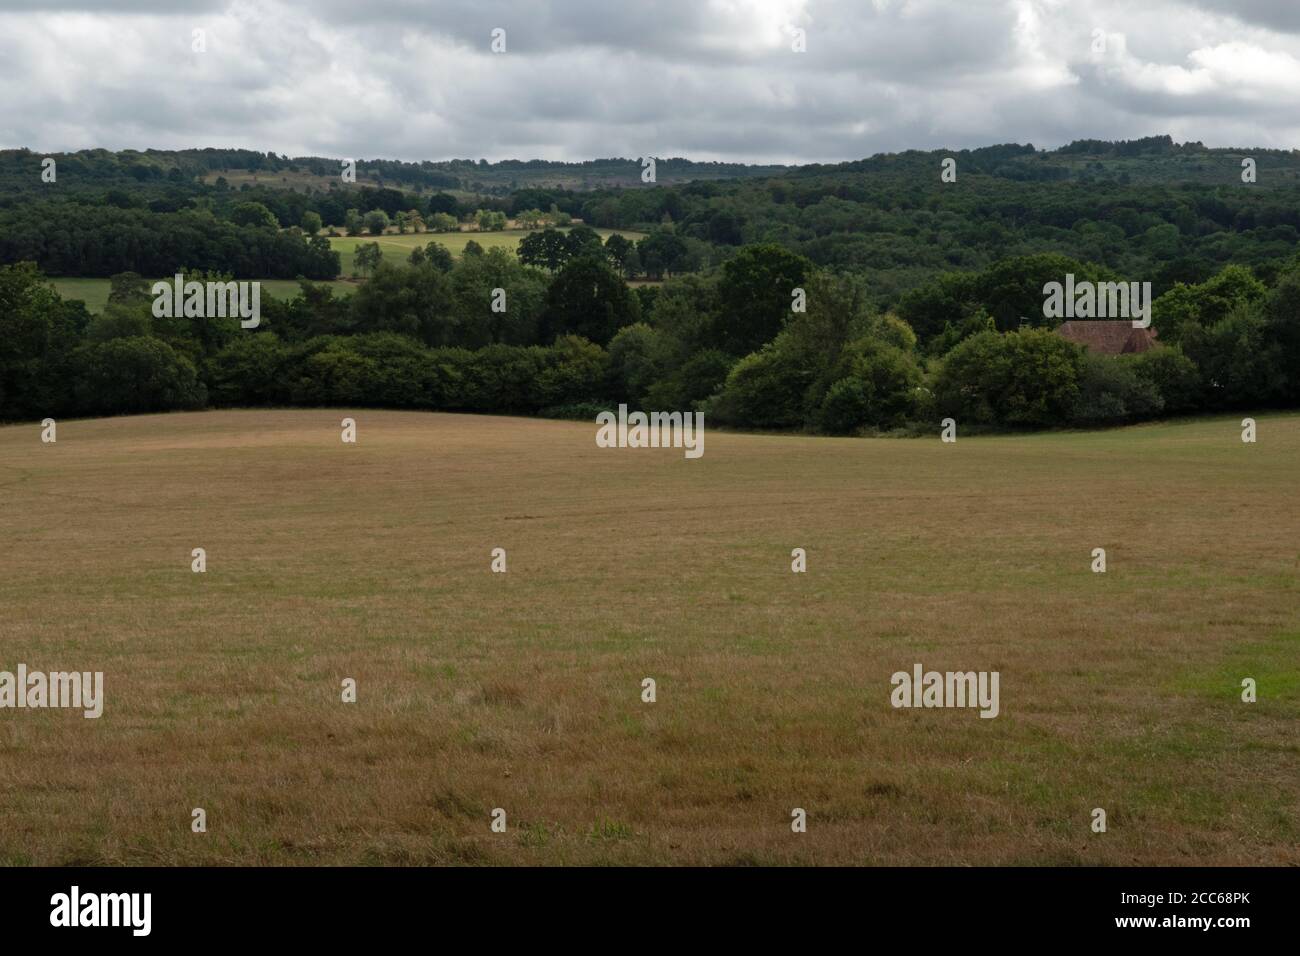 The setting for Winnie the Pooh, in the Ashdown Forest in East Sussex, England Stock Photo